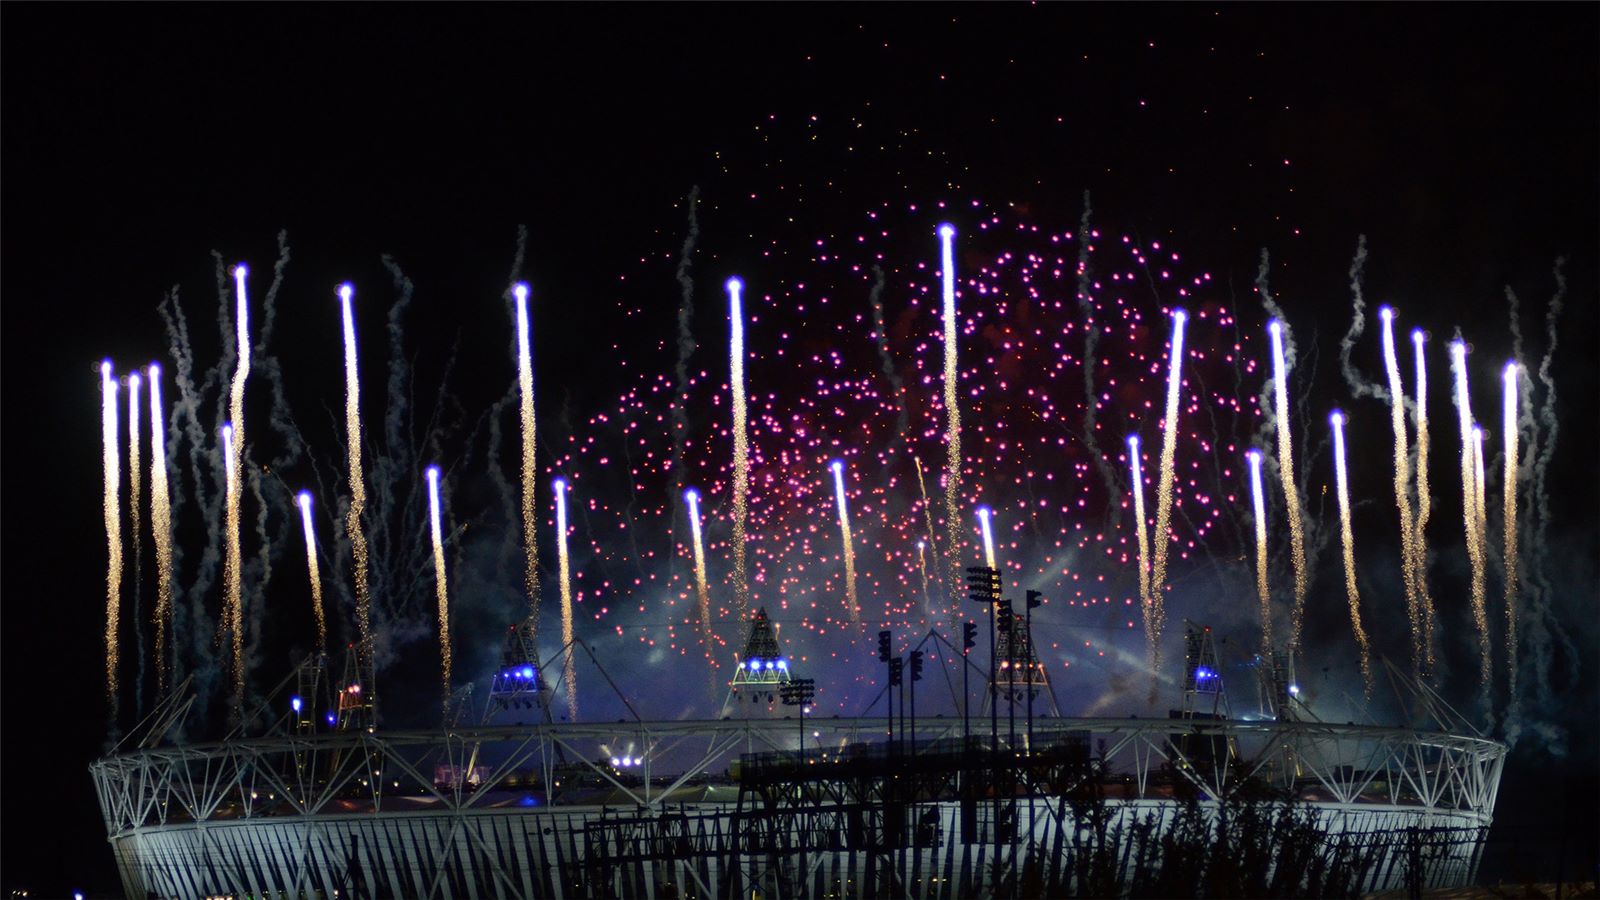 View of the Fireworks at the London 2012 Olympics - Mace Group